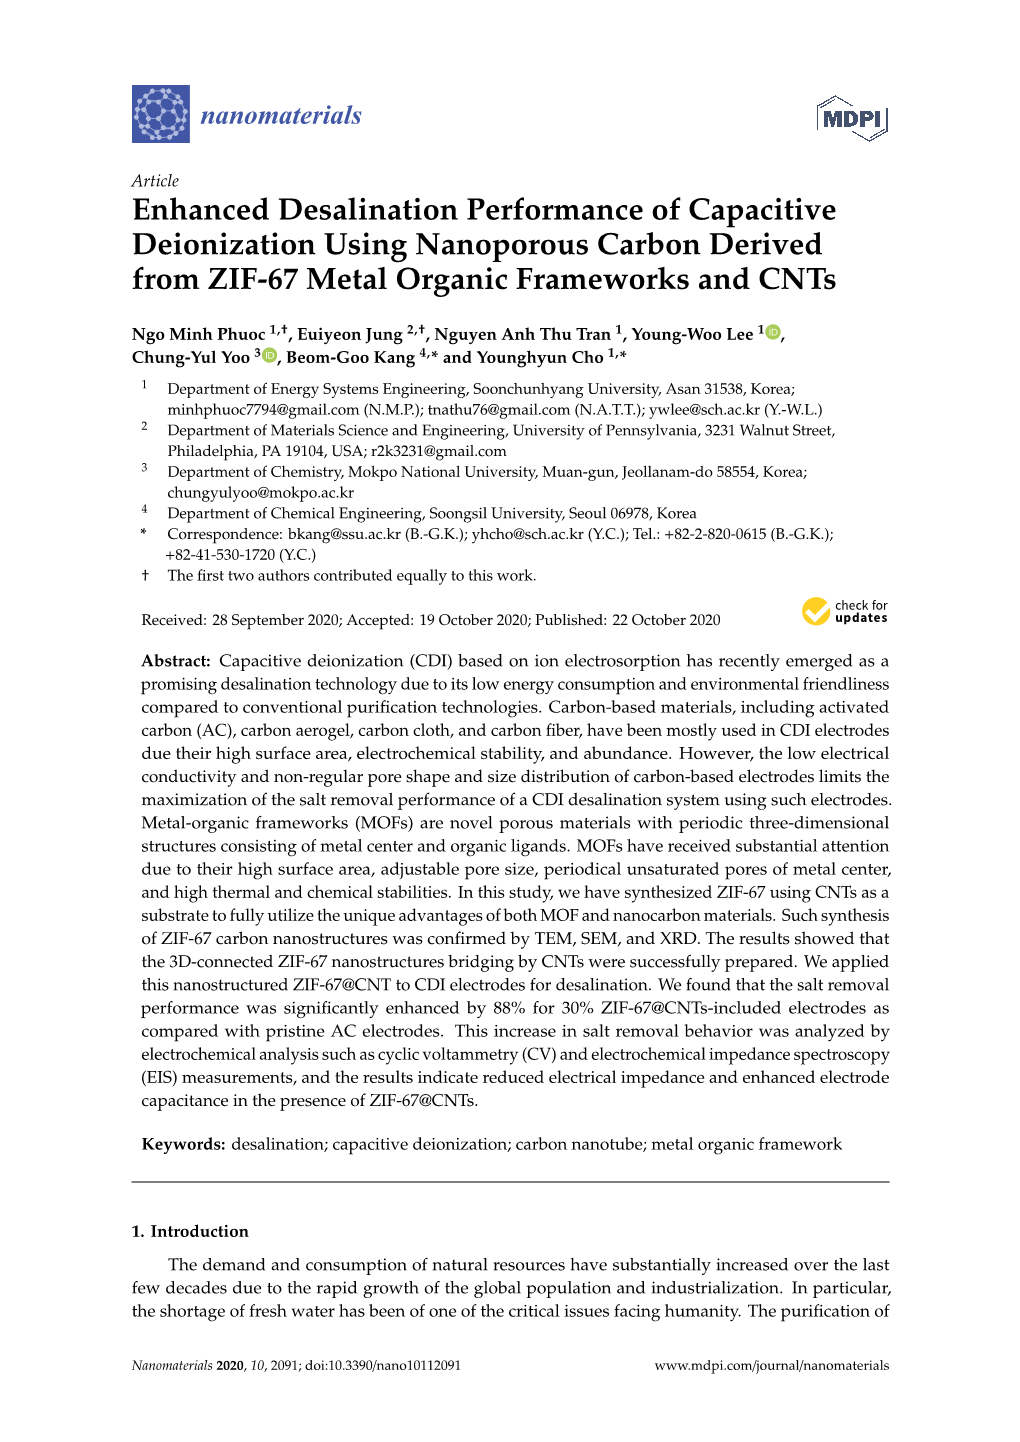 Enhanced Desalination Performance of Capacitive Deionization Using Nanoporous Carbon Derived from ZIF-67 Metal Organic Frameworks and Cnts